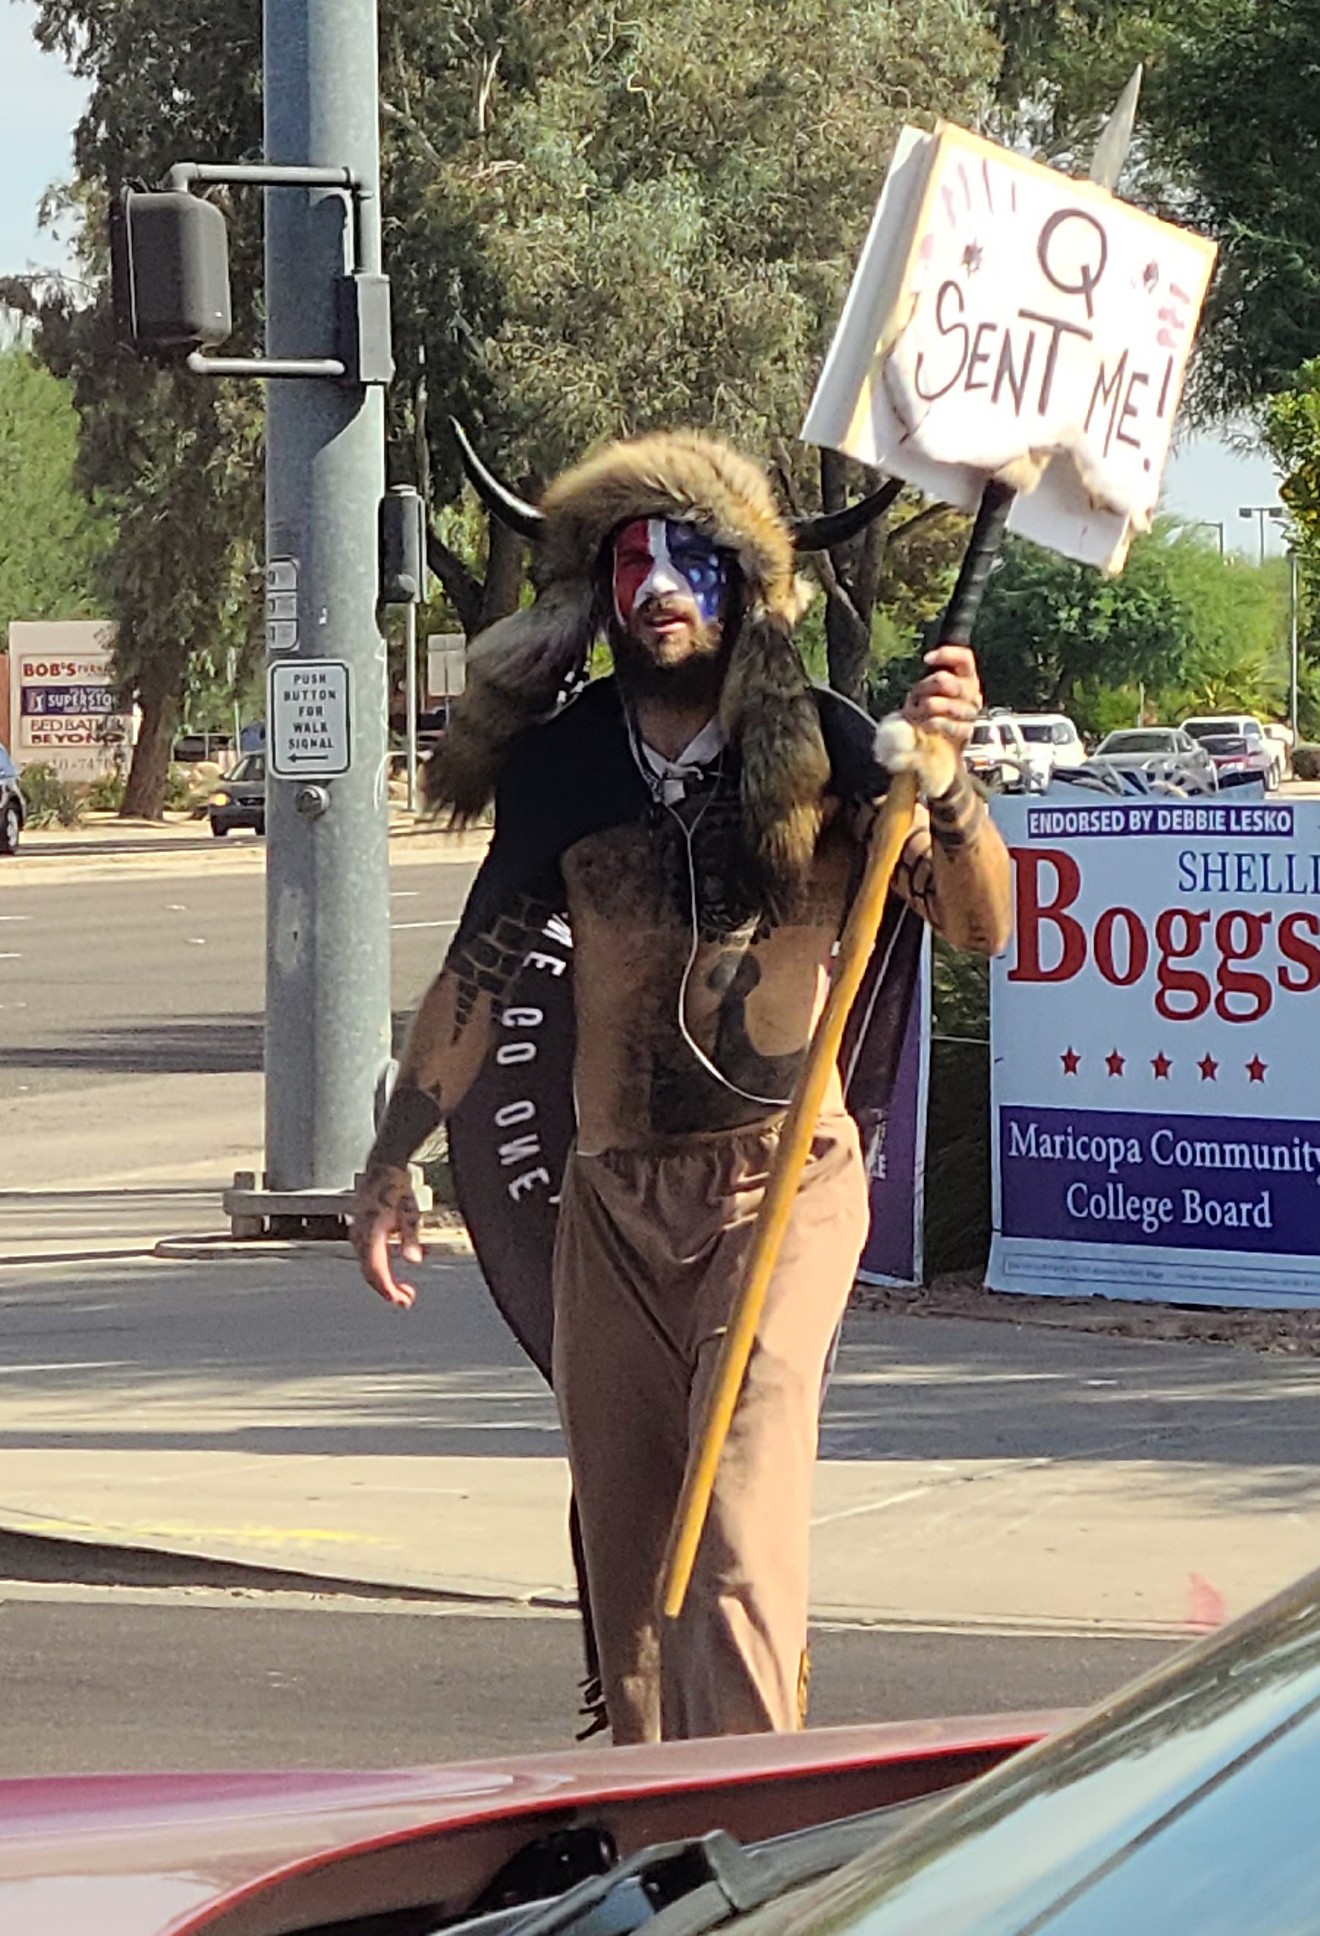 Jake Angeli, otherwise known as the QAnon Shaman, protested in Peoria in October 2020 several months before storming the U.S. Capitol.